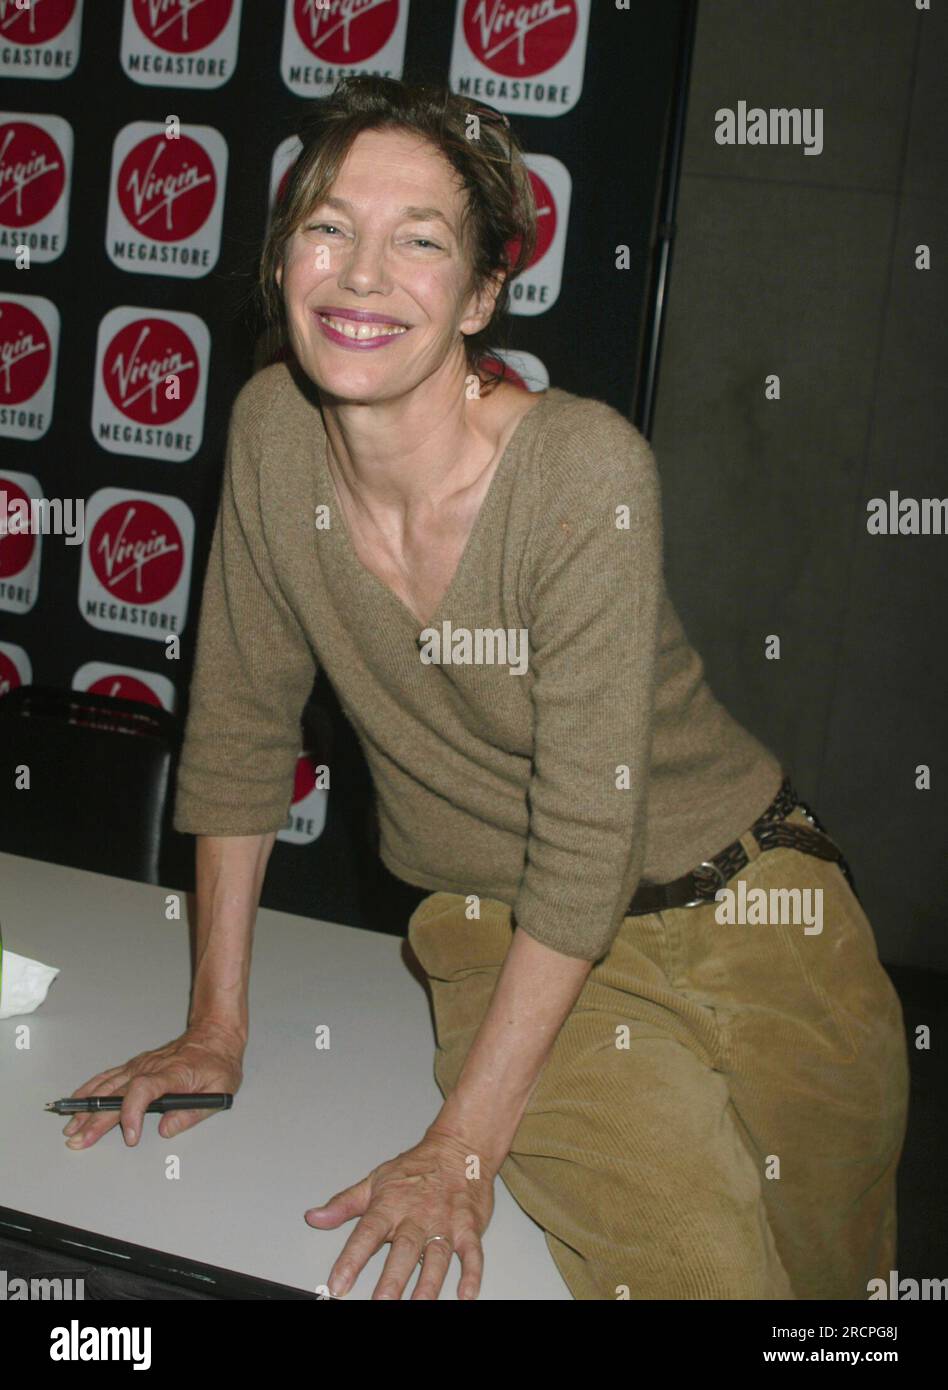 https://c8.alamy.com/comp/2RCPG8J/file-photo-jane-birkin-has-passed-away-jane-birkin-cd-signing-for-arabesque-after-her-concert-at-florence-gould-hall-in-new-york-city-on-september-18-2003-photo-credit-henry-mcgeemediapunch-2RCPG8J.jpg